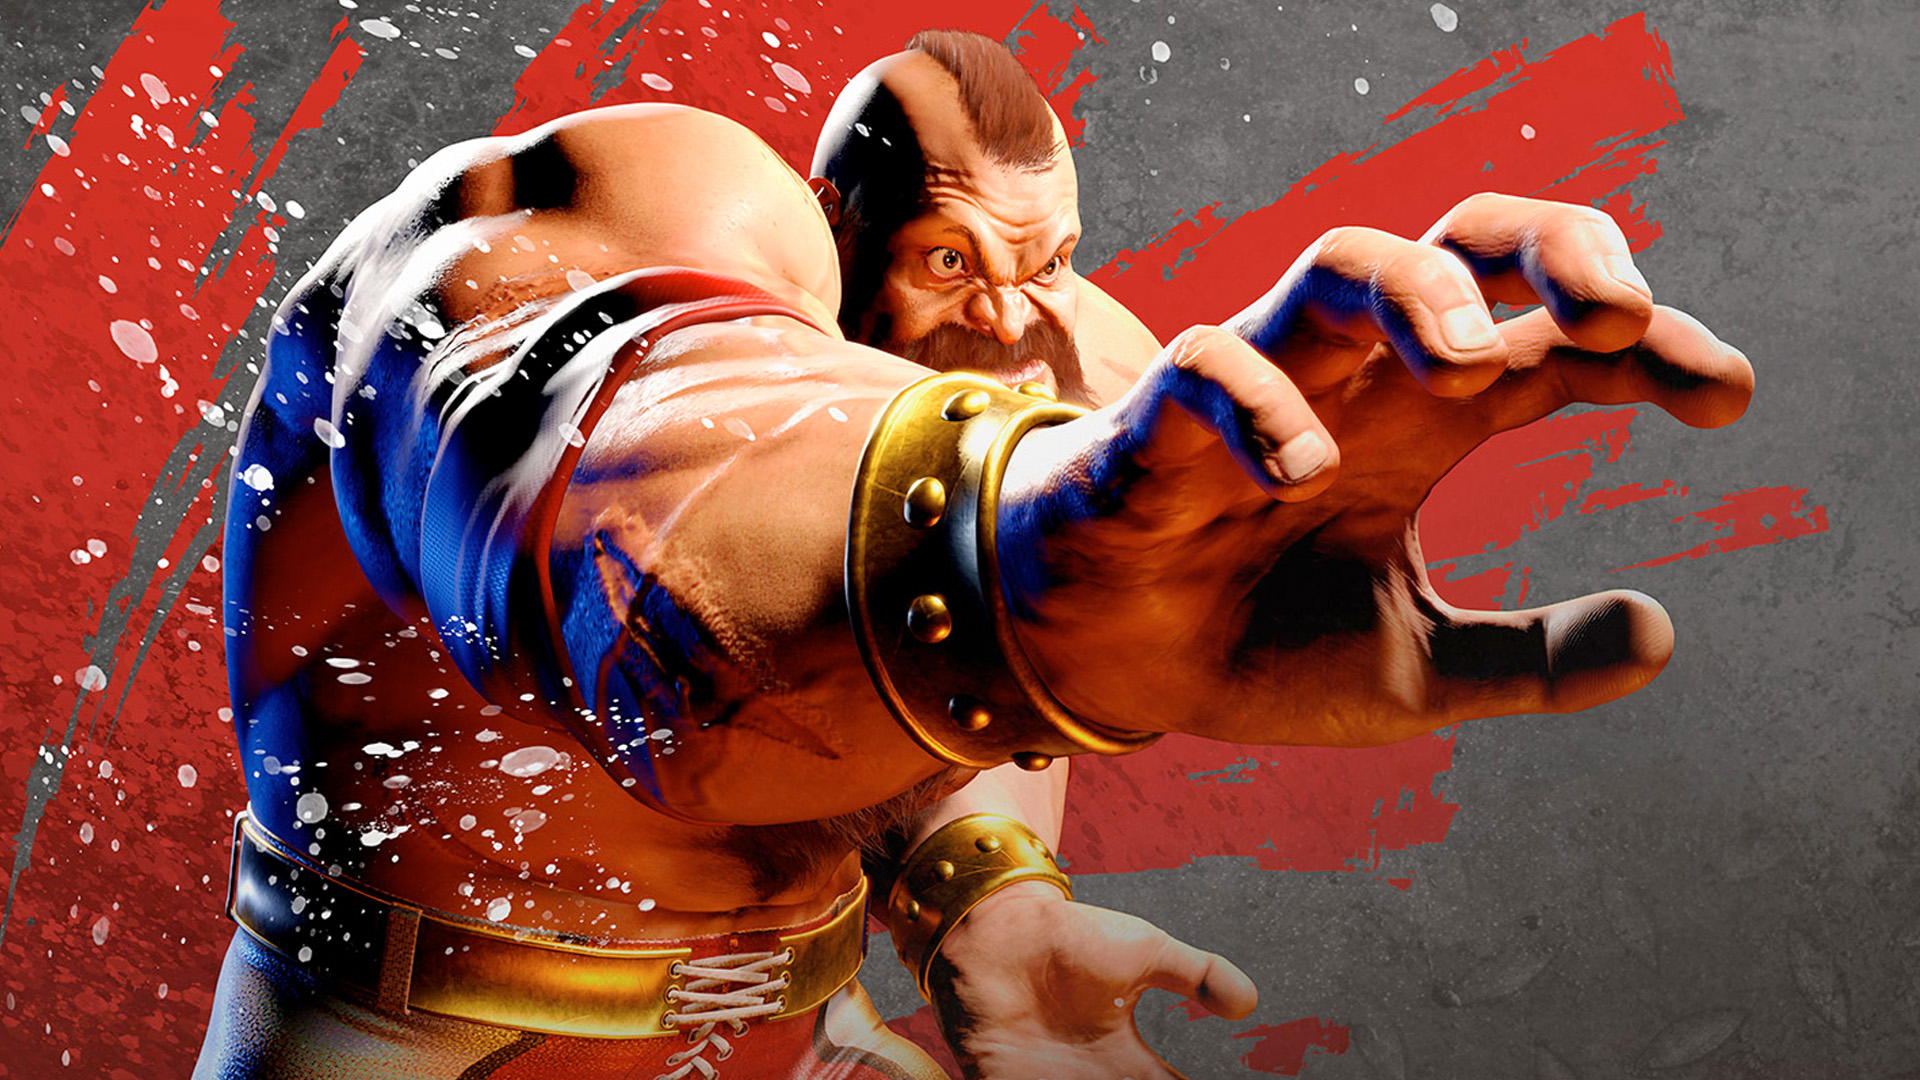 Street Fighter 6 Roster: Who Are the Leaked Characters?